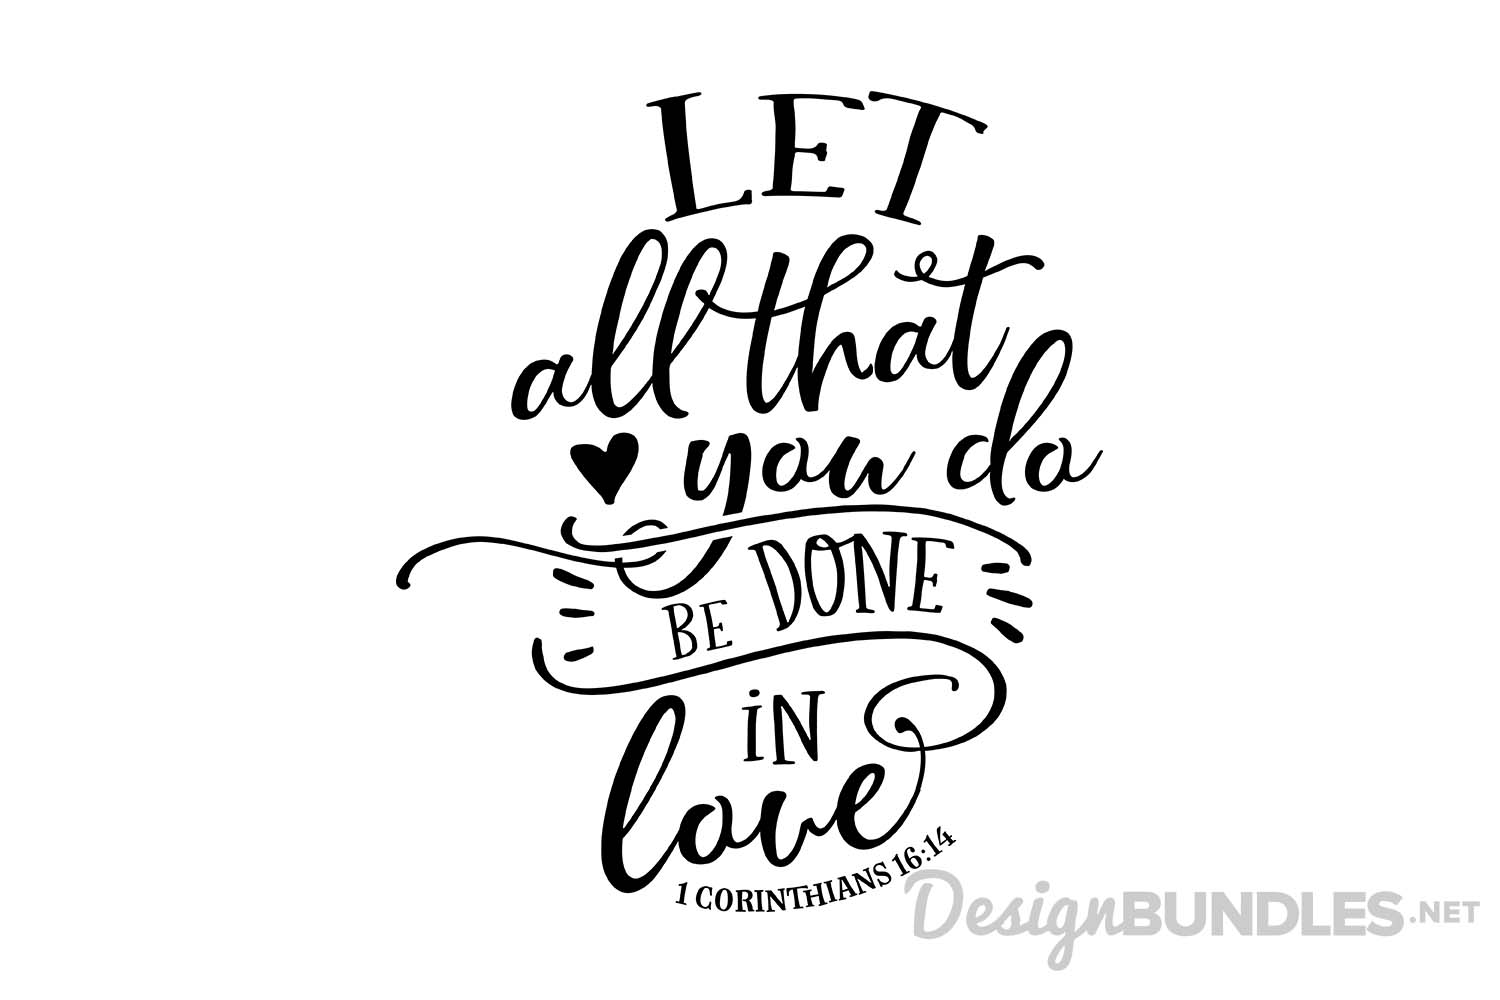 let all that you do be done in love niv